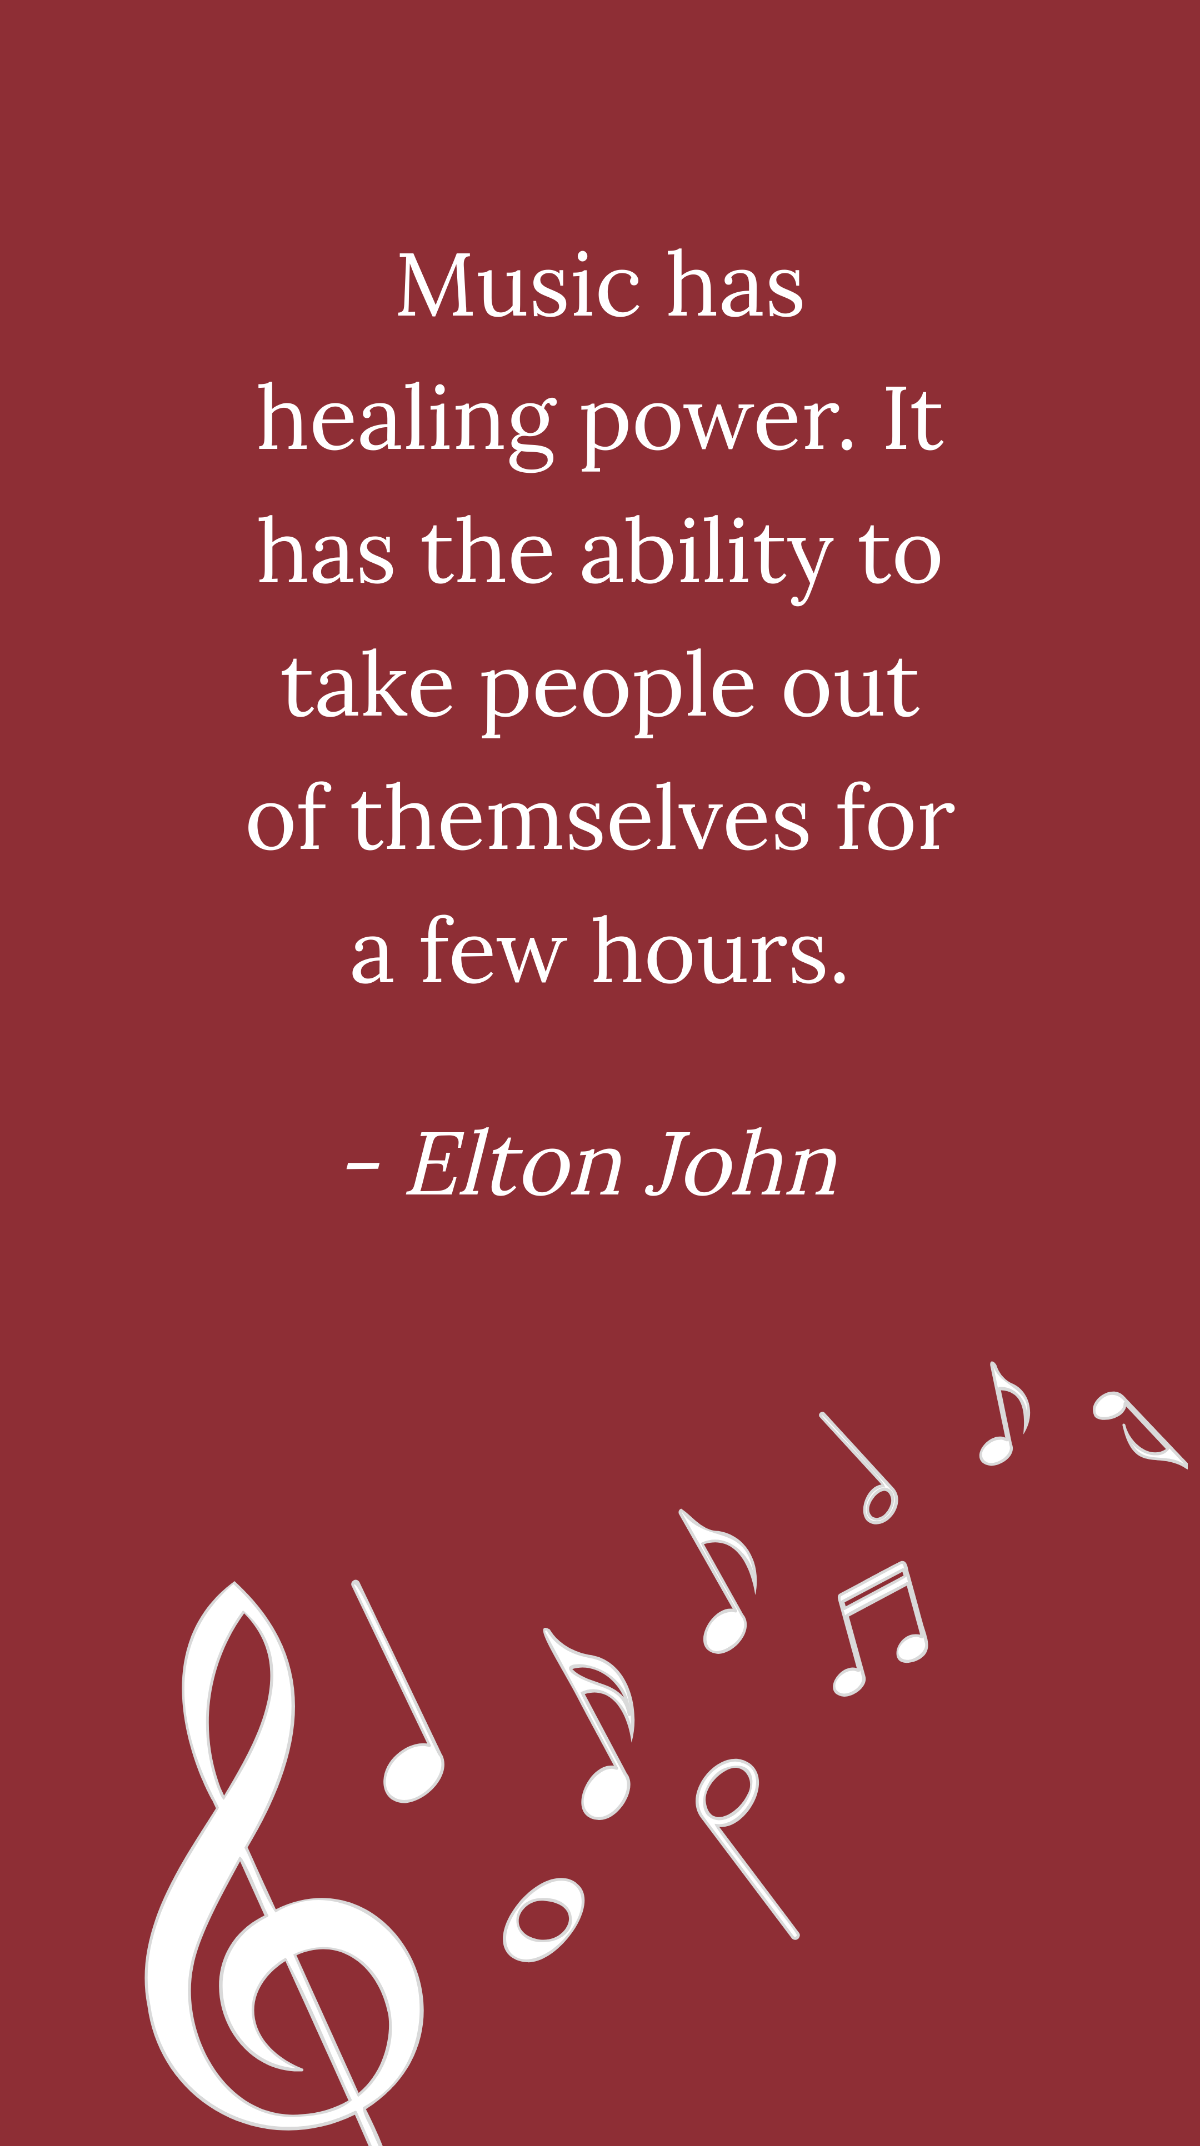 Free Elton John - Music has healing power. It has the ability to take people out of themselves for a few hours. Template